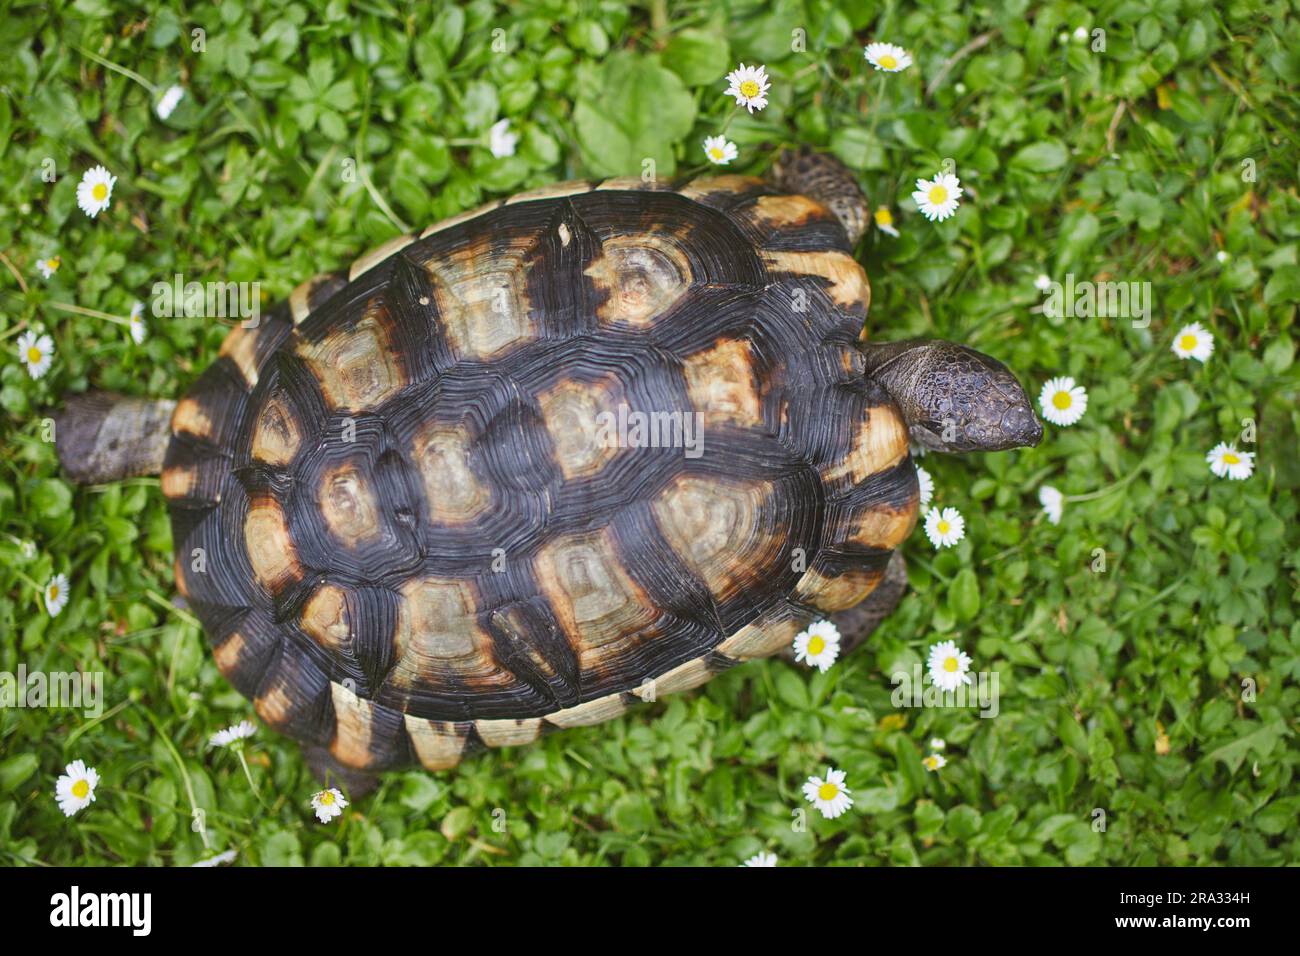 Turtle during slow walking in grass on back yard (selective focus on head). Domestic life with pets. Stock Photo